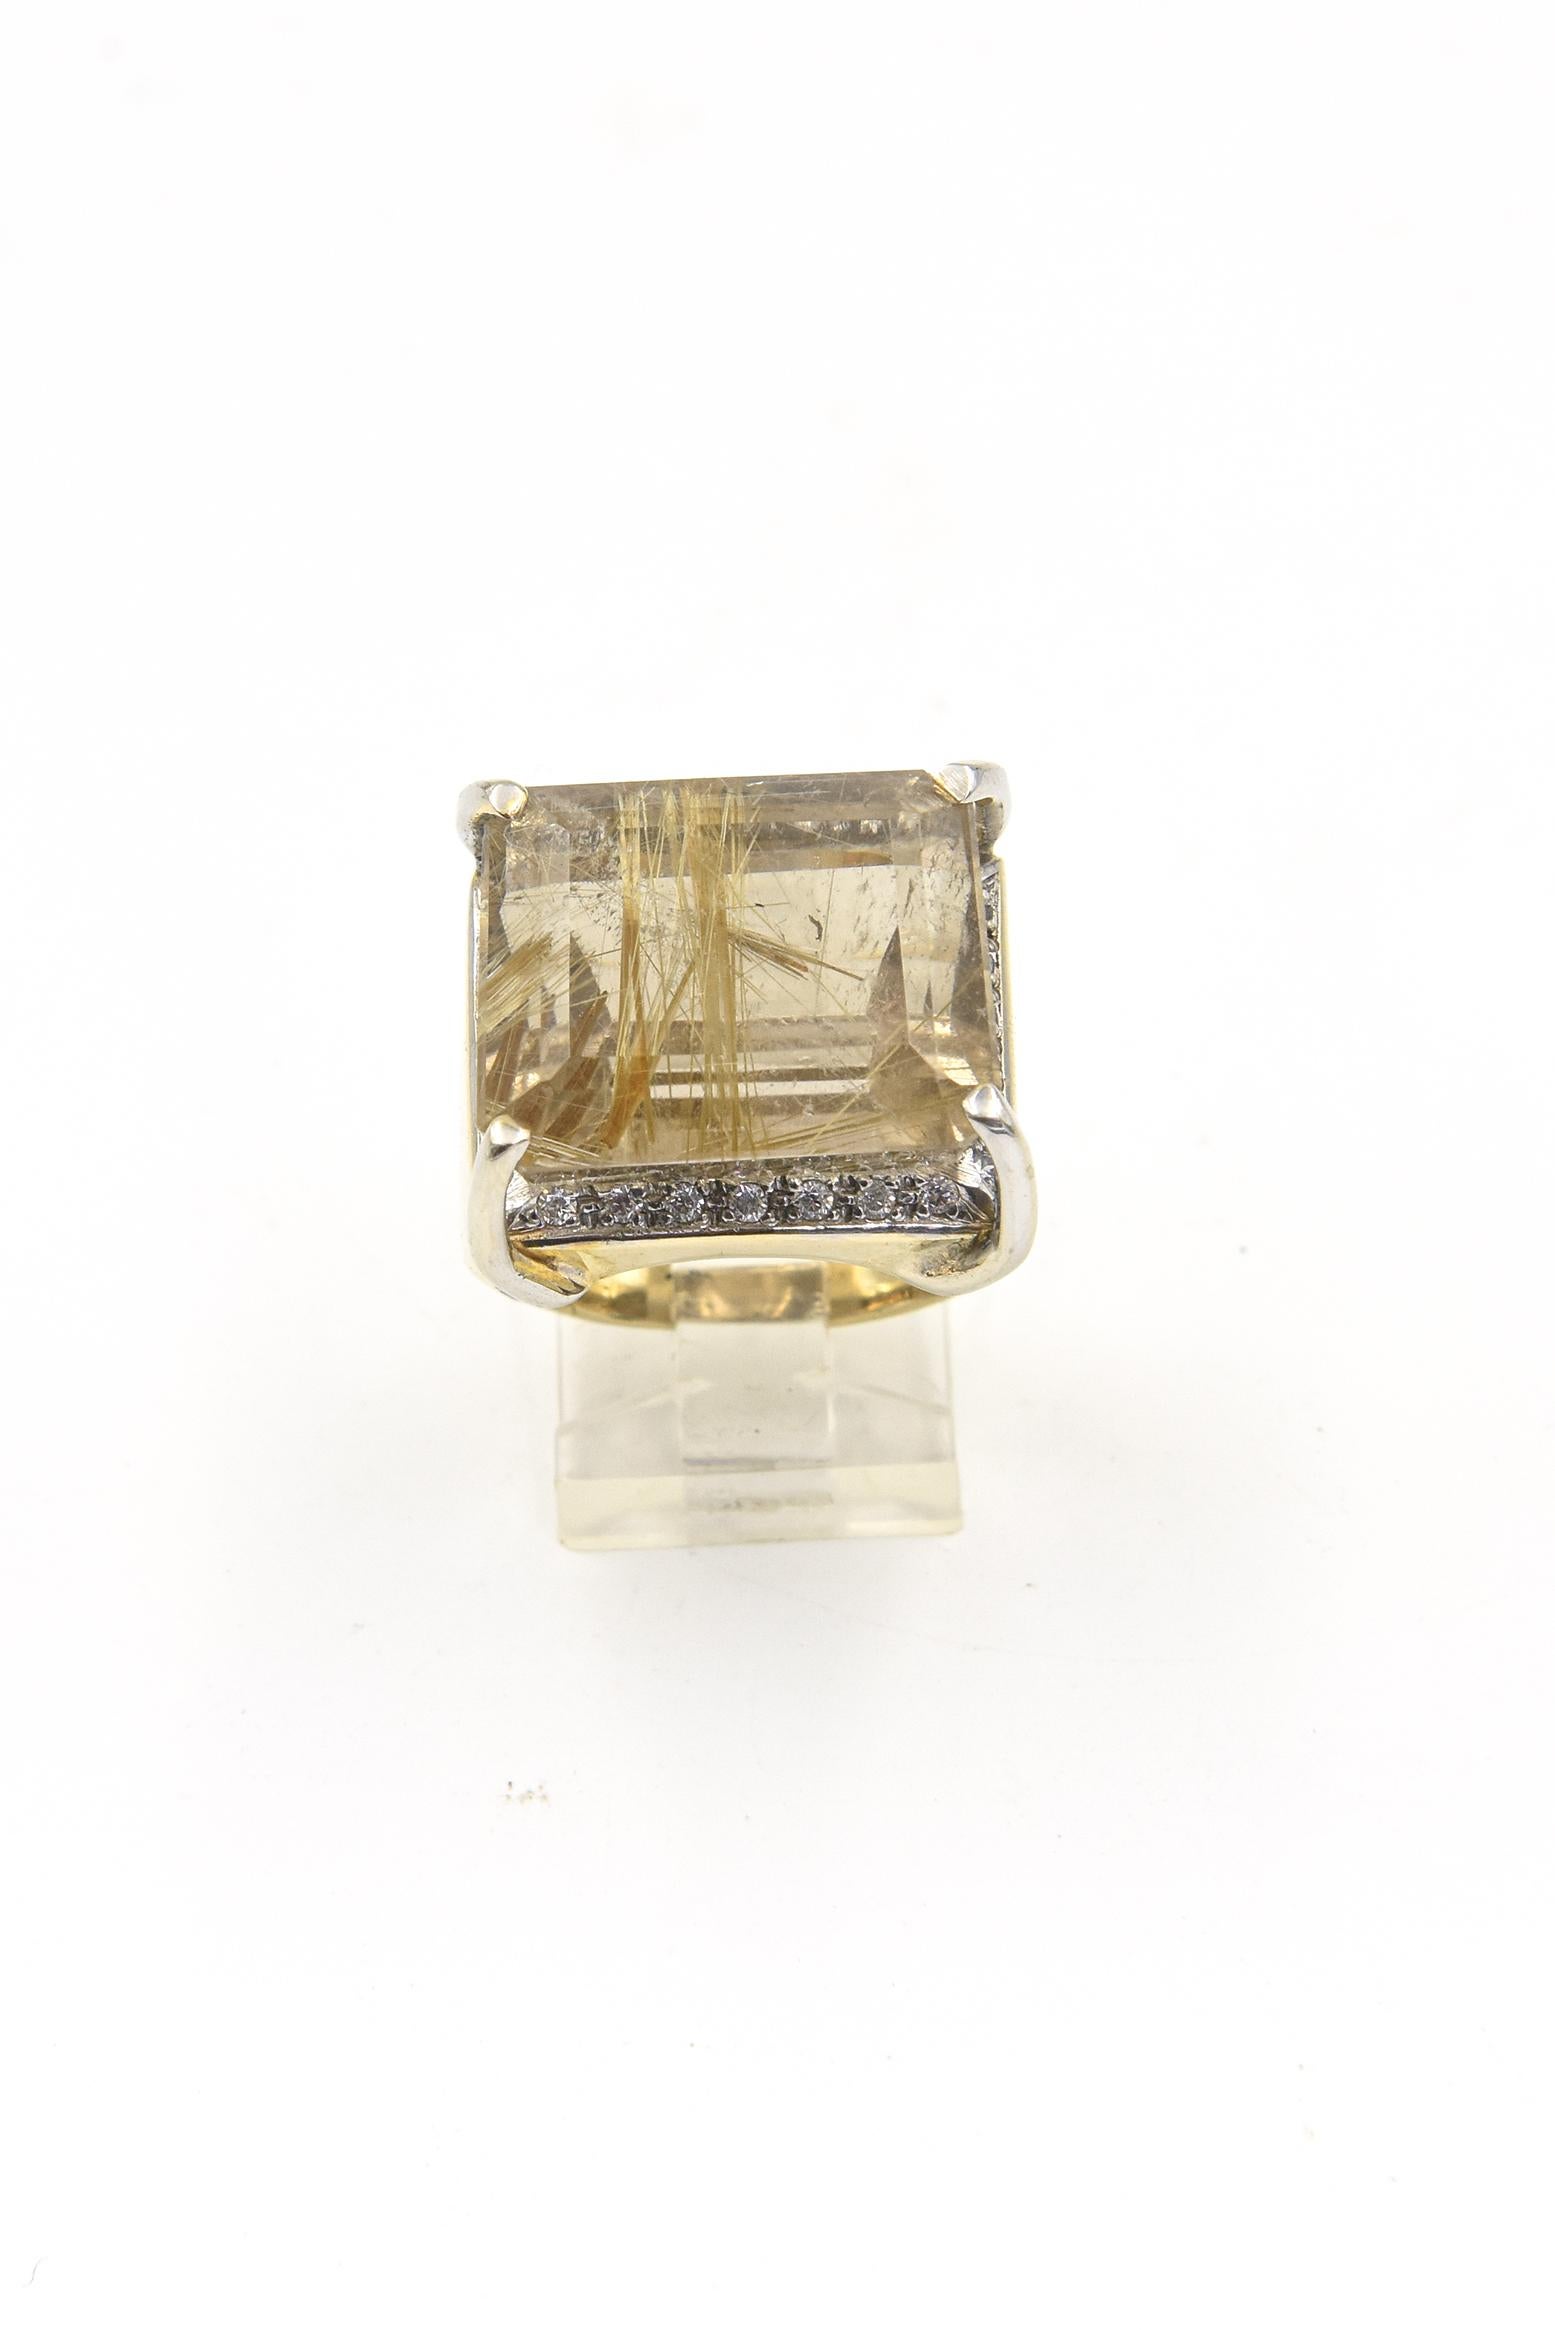 Stunning faceted rectangular rutilated quartz mounted in a wide 14k yellow gold band with cubic zirconia accents forming a frame.  The ring is .85